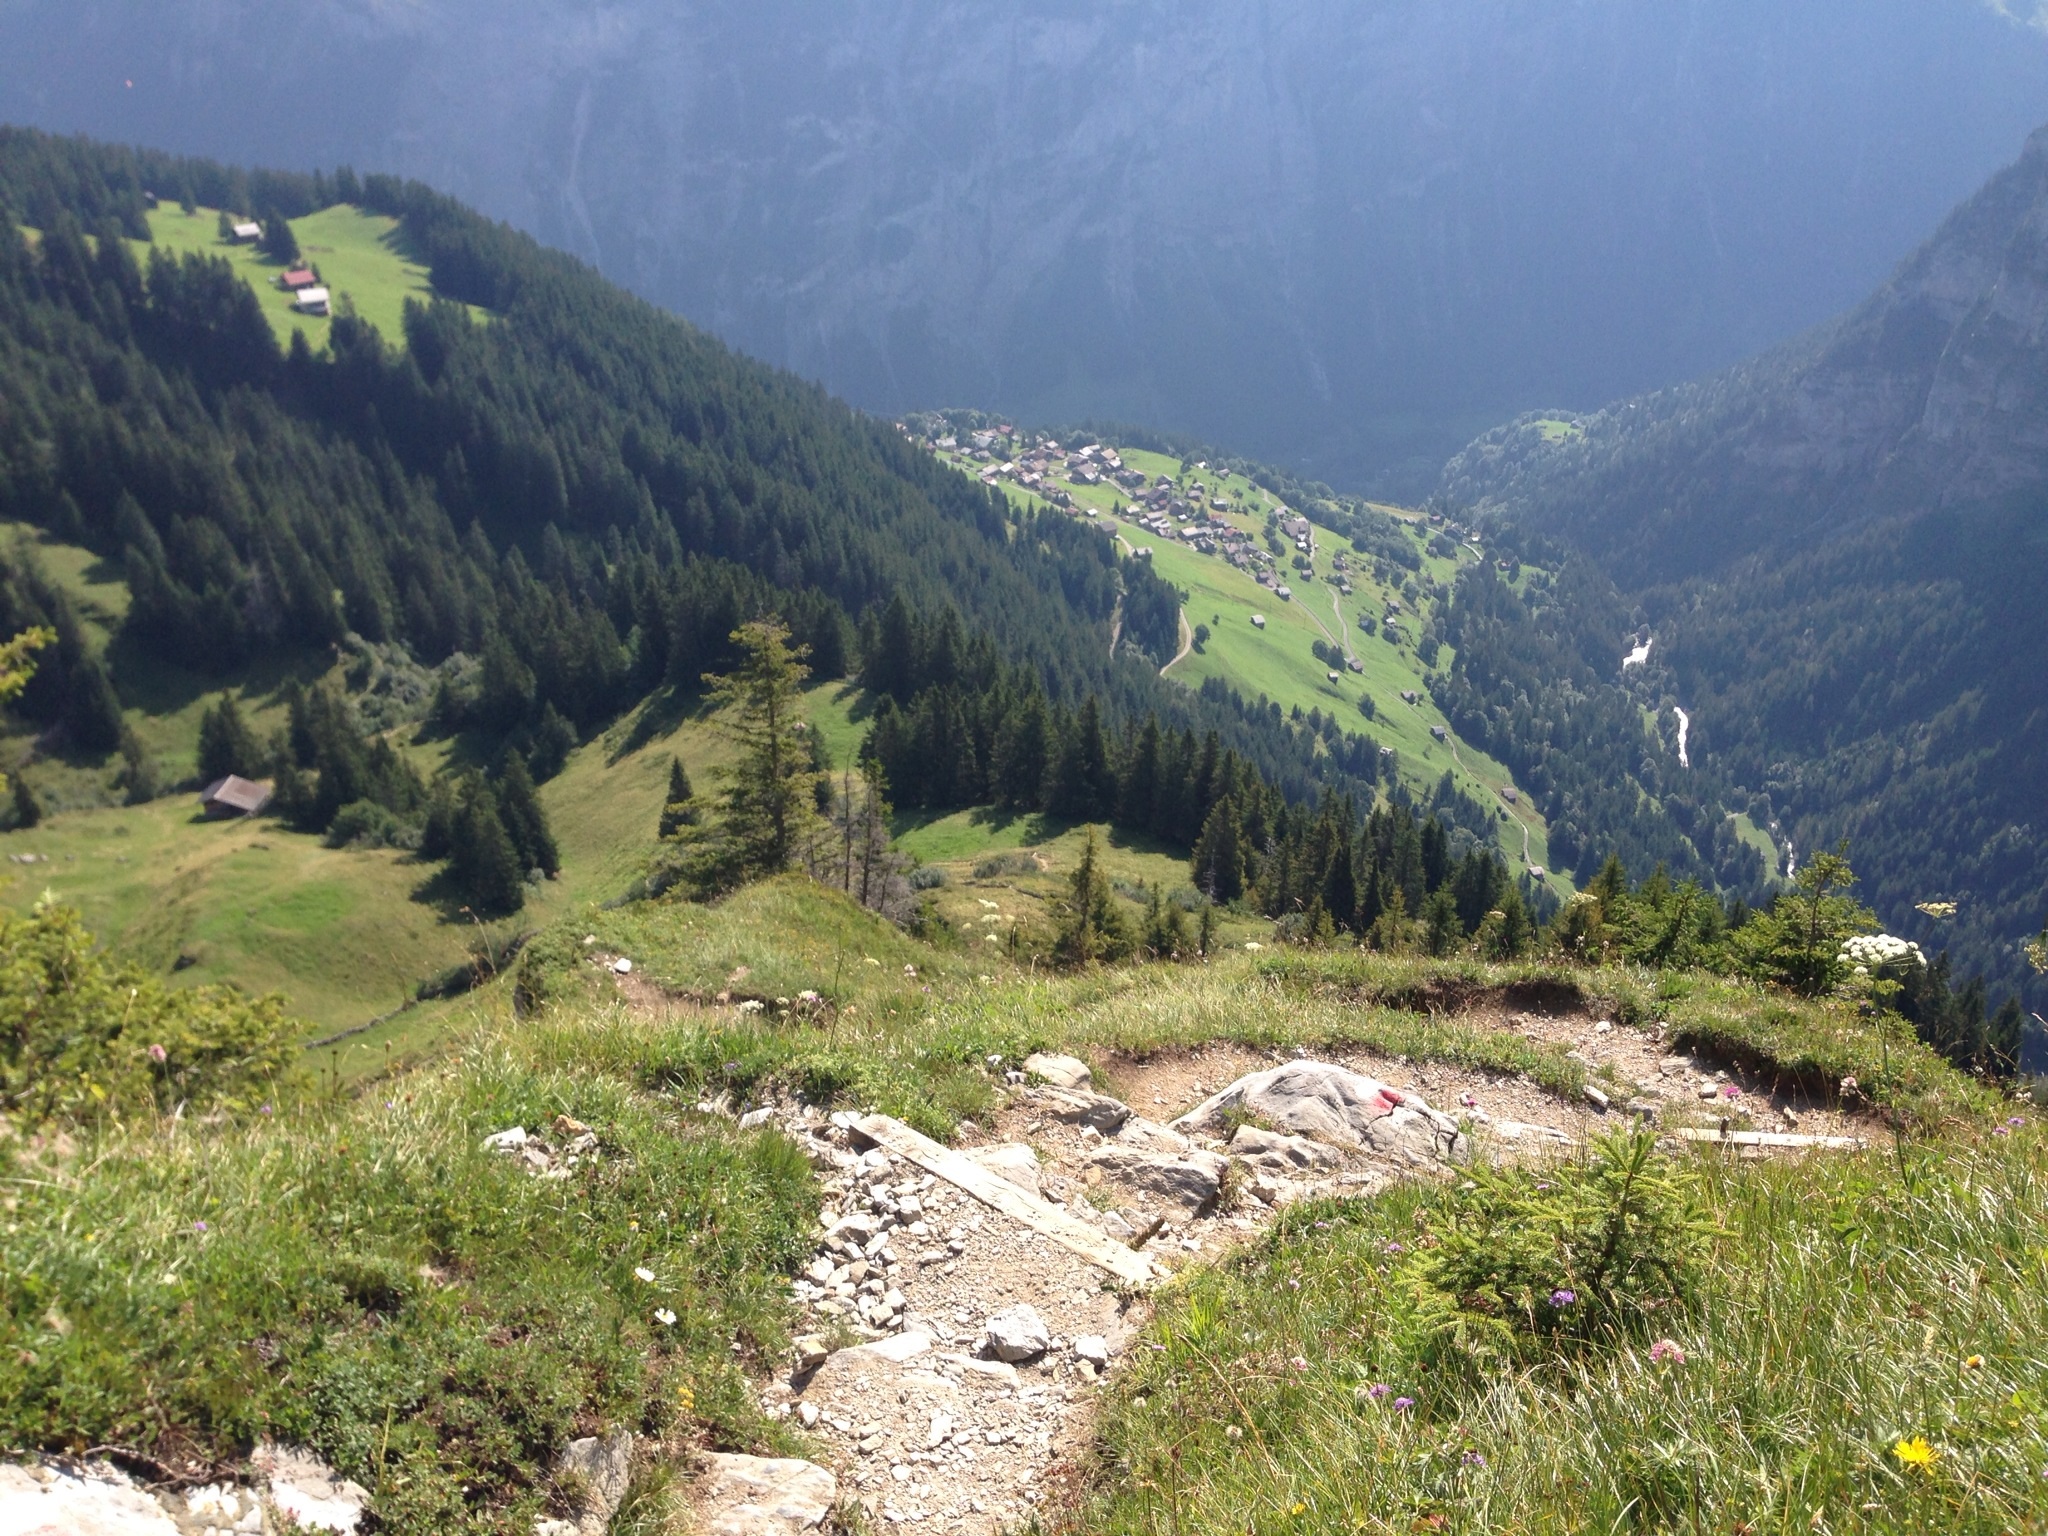 View down to Grimmelwald